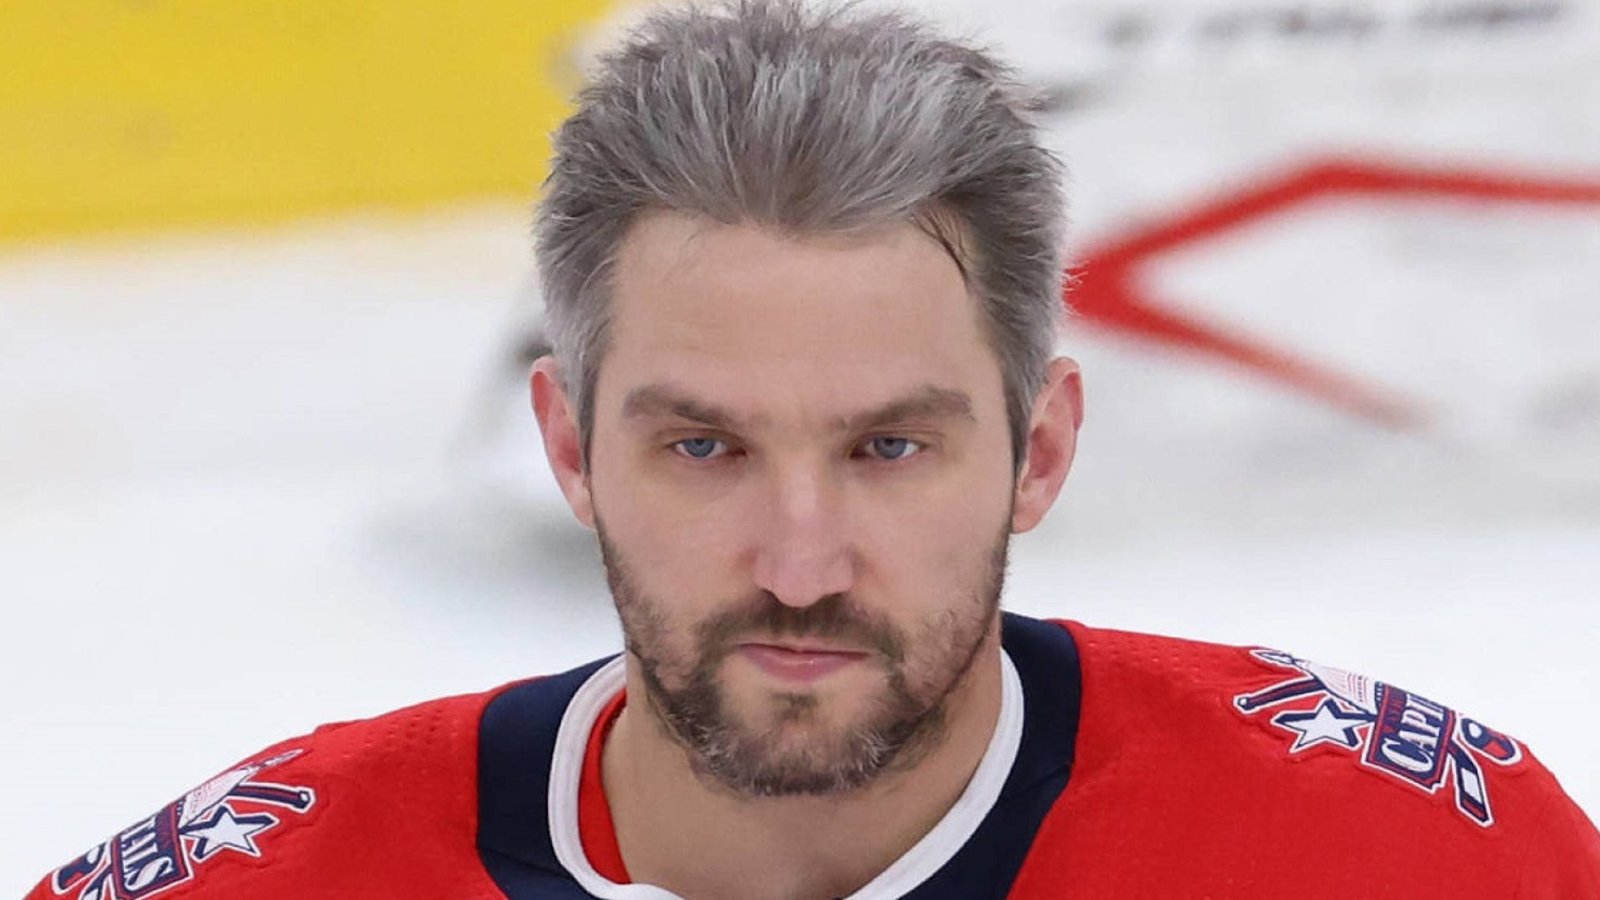 Fans in Washington troll Ovechkin with scathing signs at tonight's game.